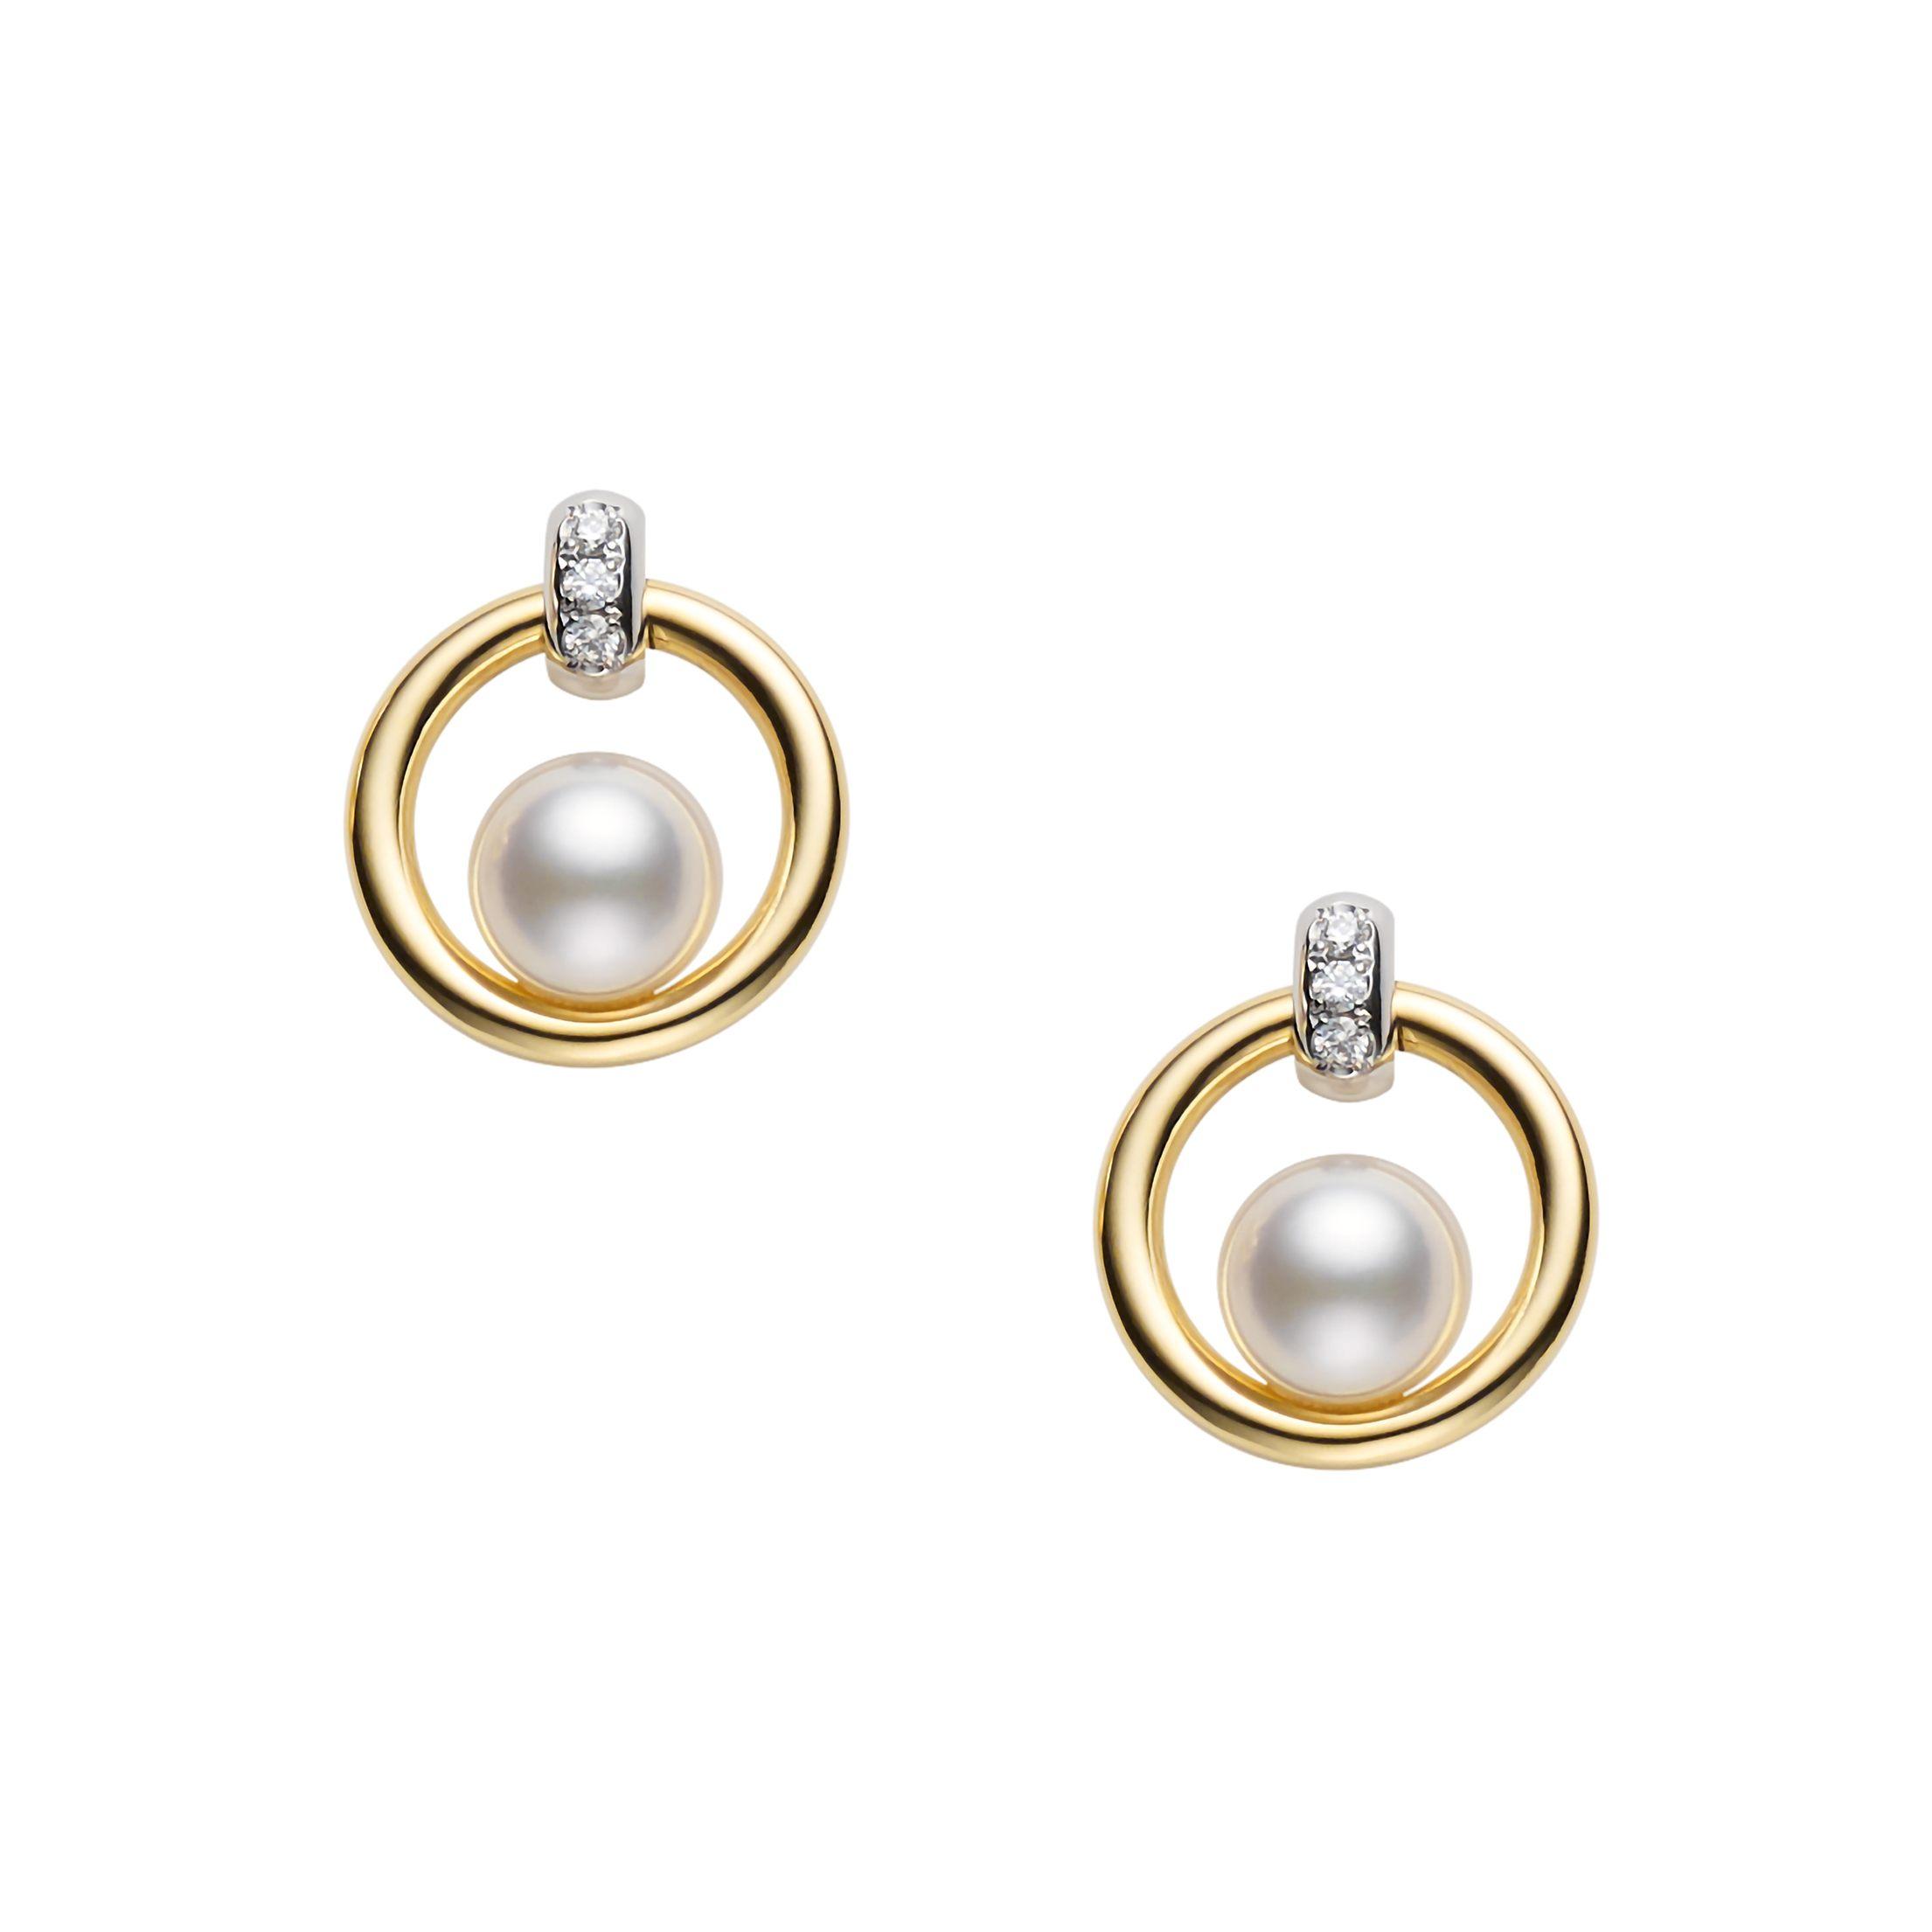 Mikimoto pearl and diamond earrings | Front View